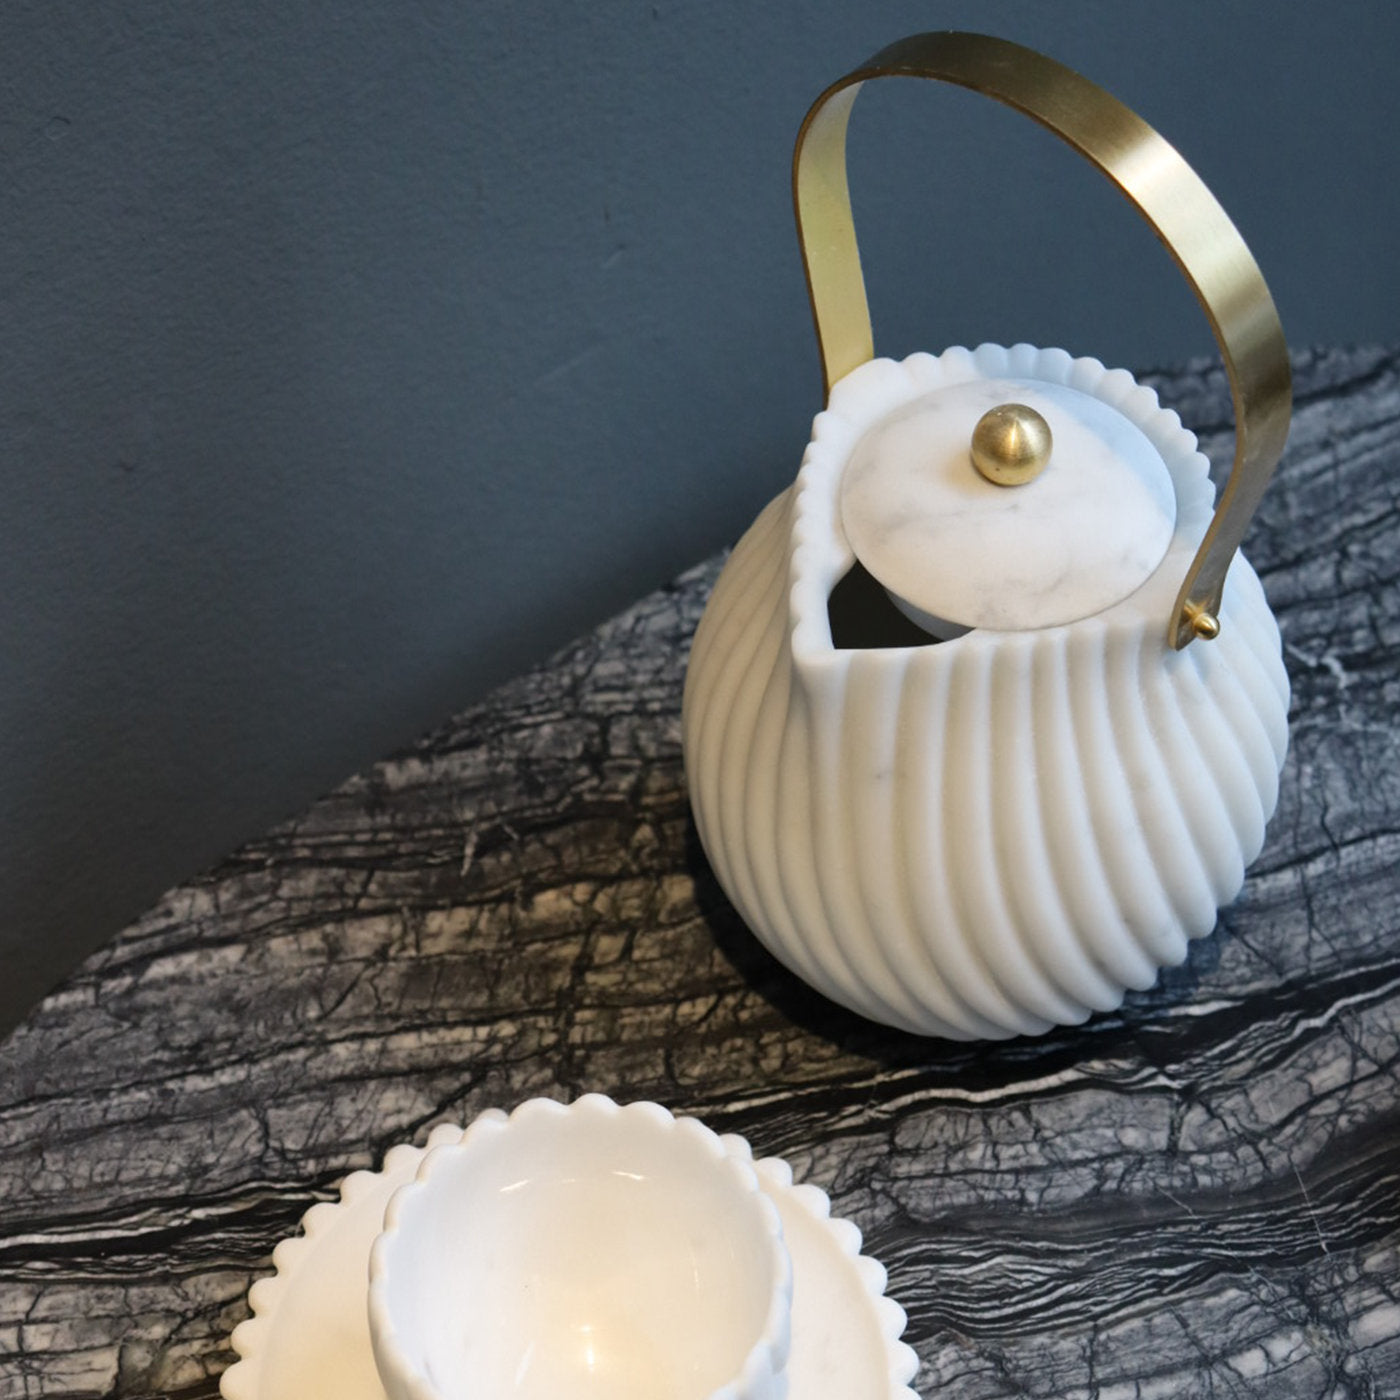 Victoria Complete Tea Set by Bethan Gray - Alternative view 3